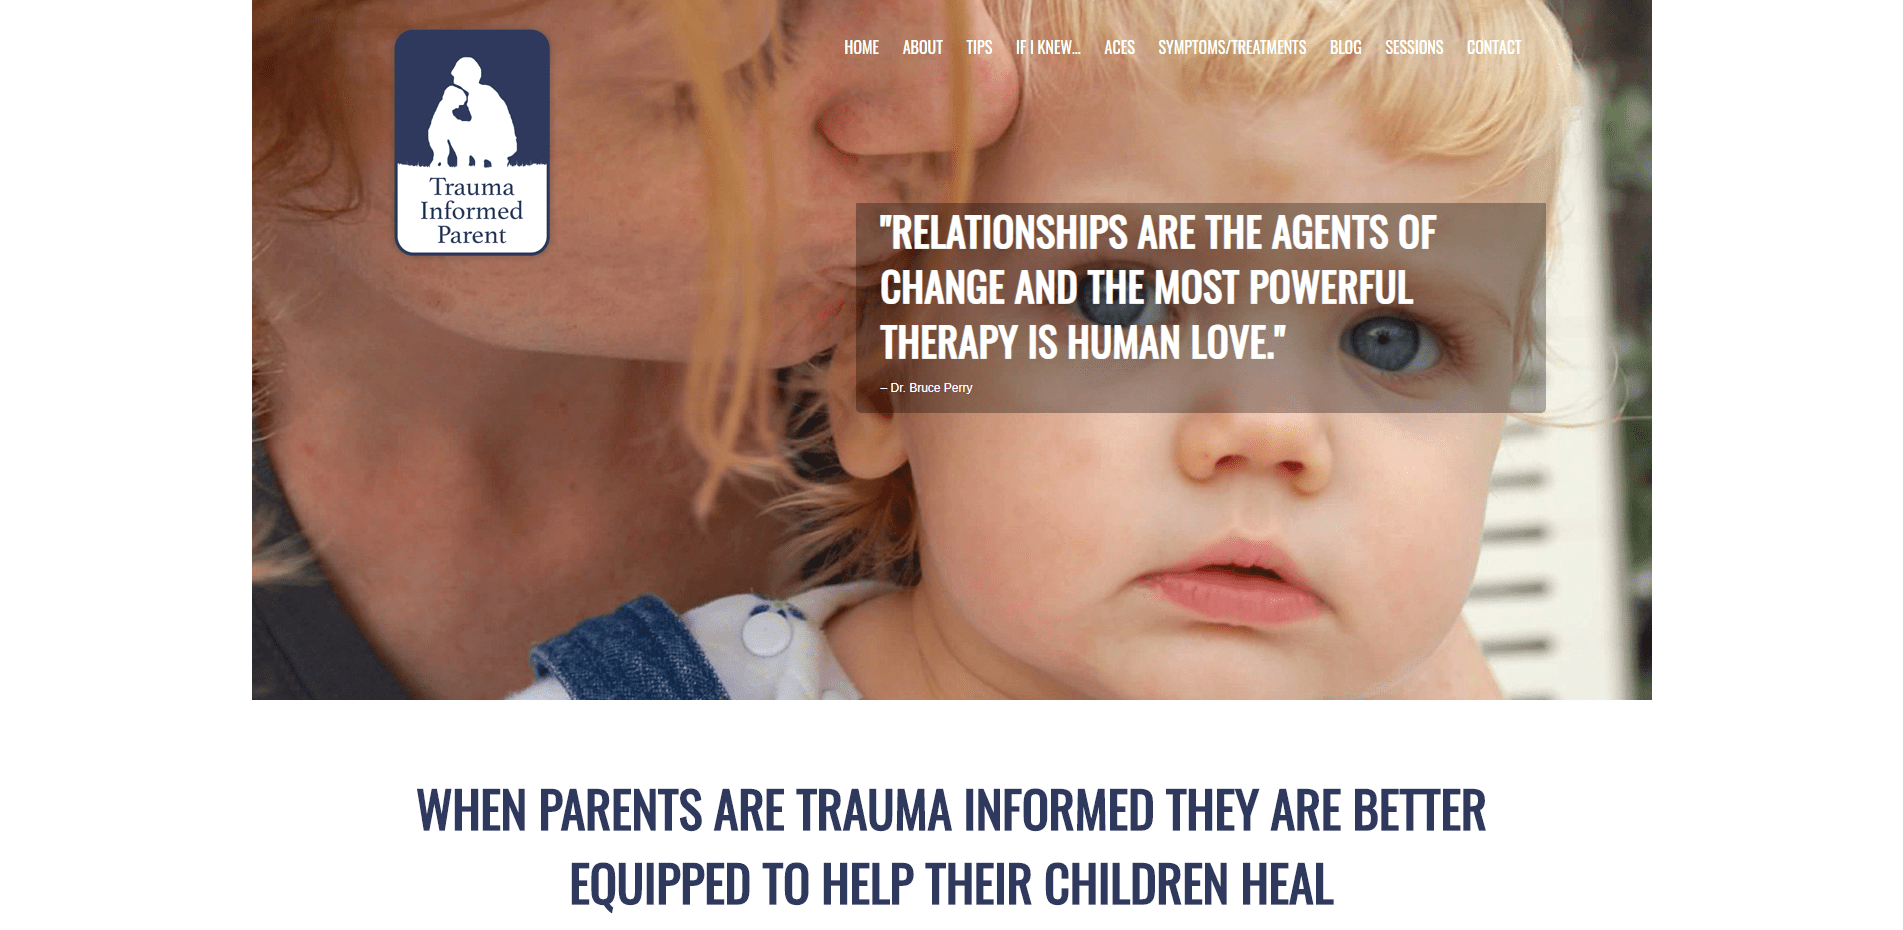 Trauma Informed Parent – WHEN PARENTS ARE TRAUMA INFORMED THEY ARE BETTER EQUIPPED TO HELP THEIR CHILDREN HEAL